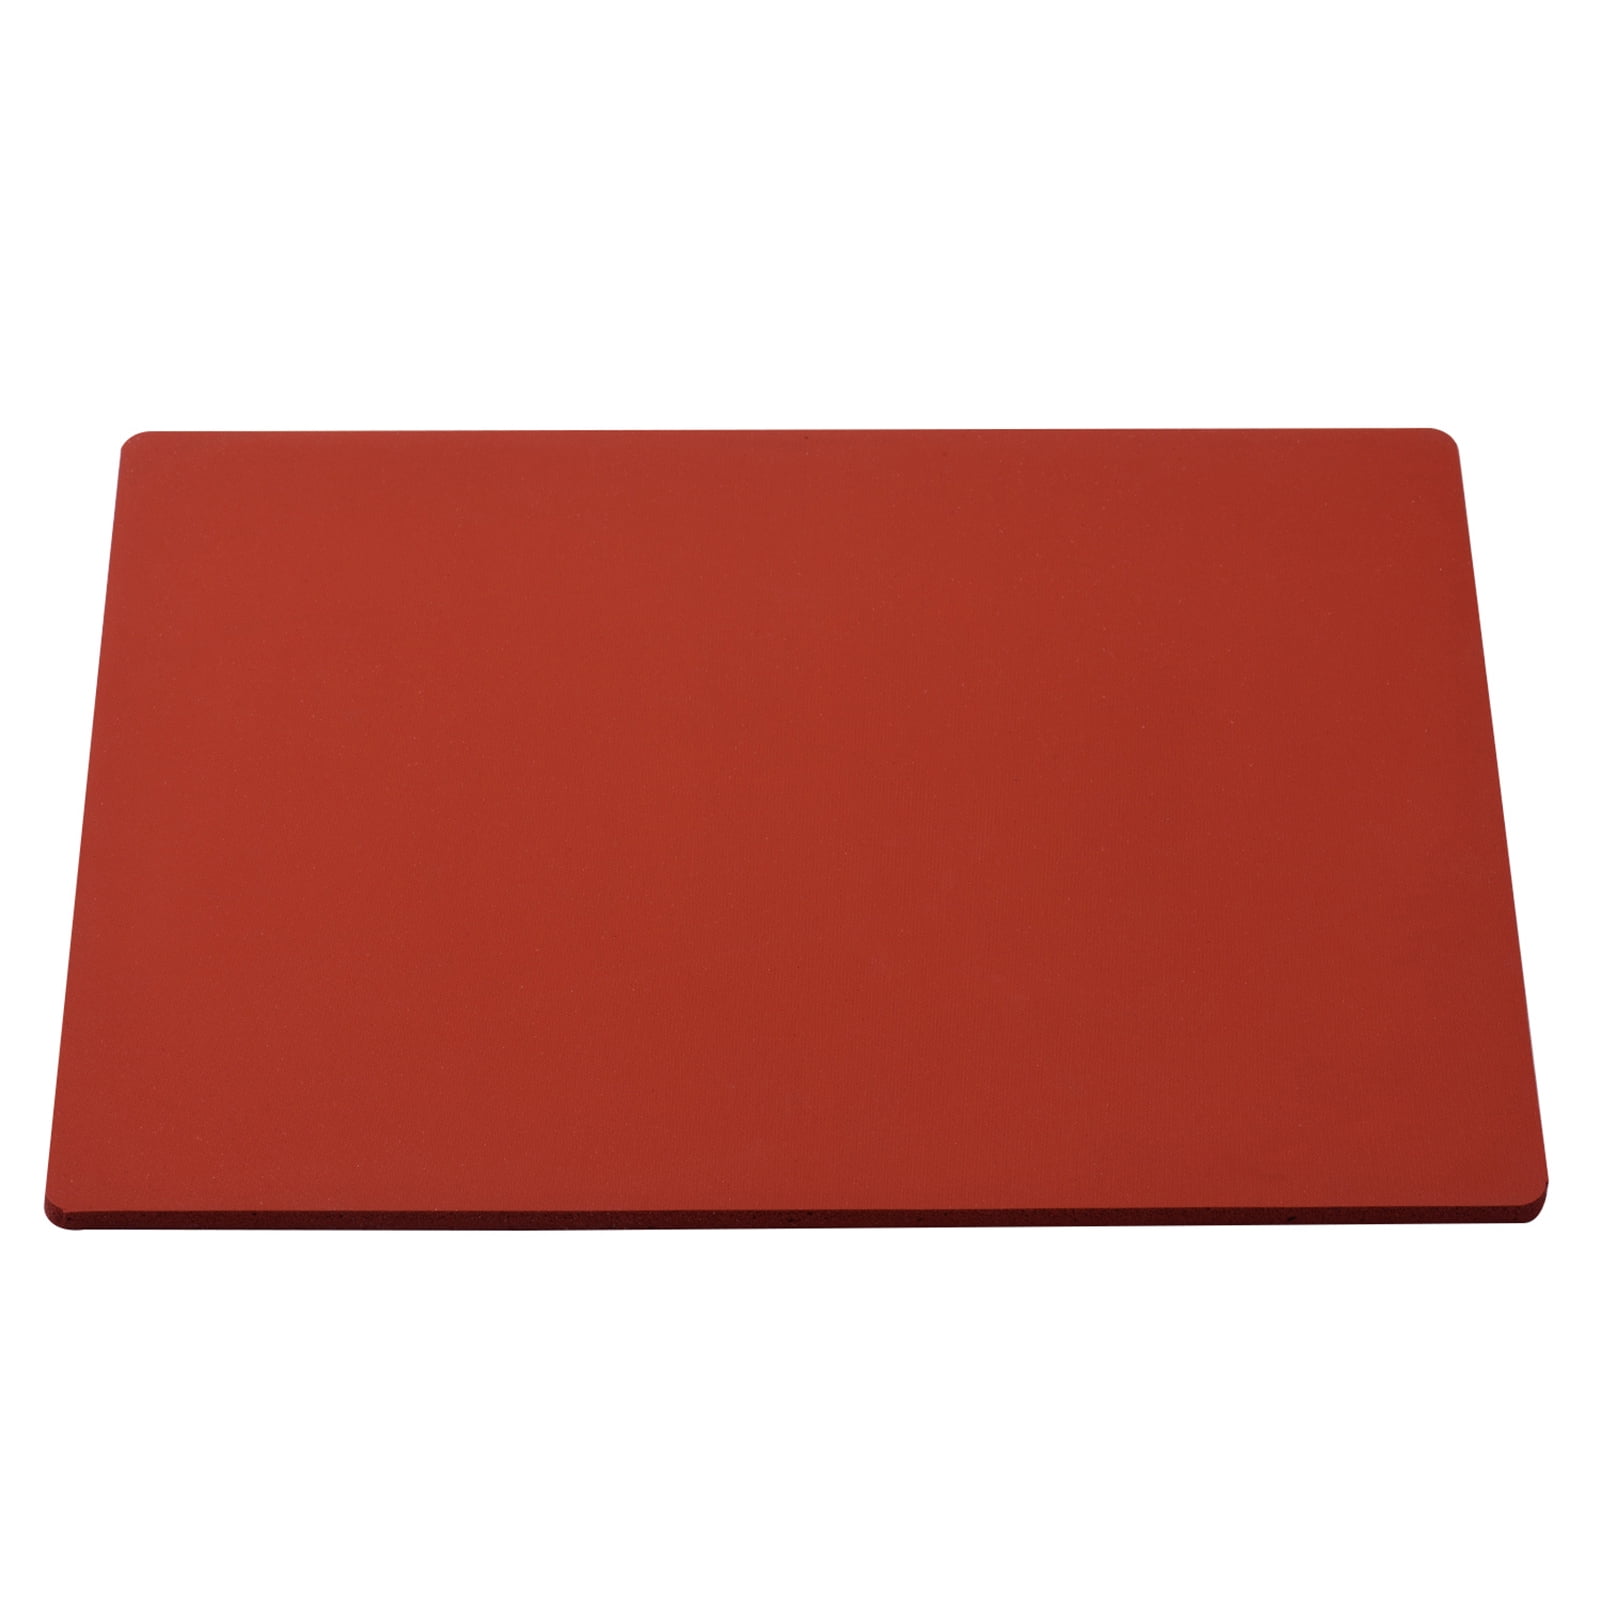 10 x 7.7 Silicone Heat Press Pad Mat 0.3 Thick for Heat Press